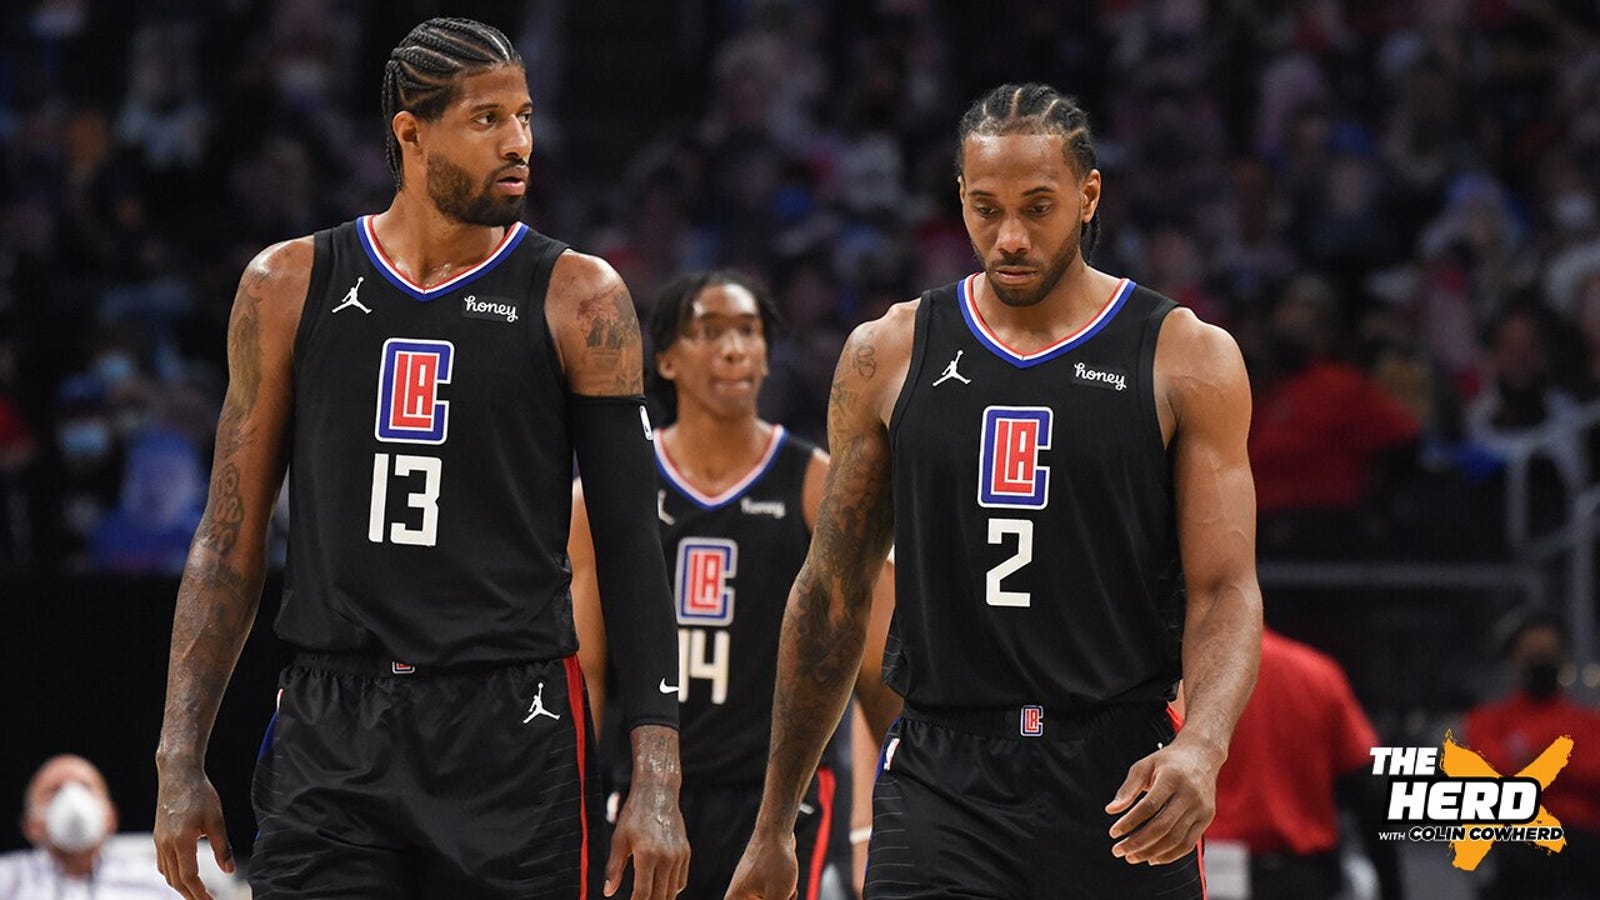 The Clippers are reluctant to make both Kawhi and PG Max deals, according to the report